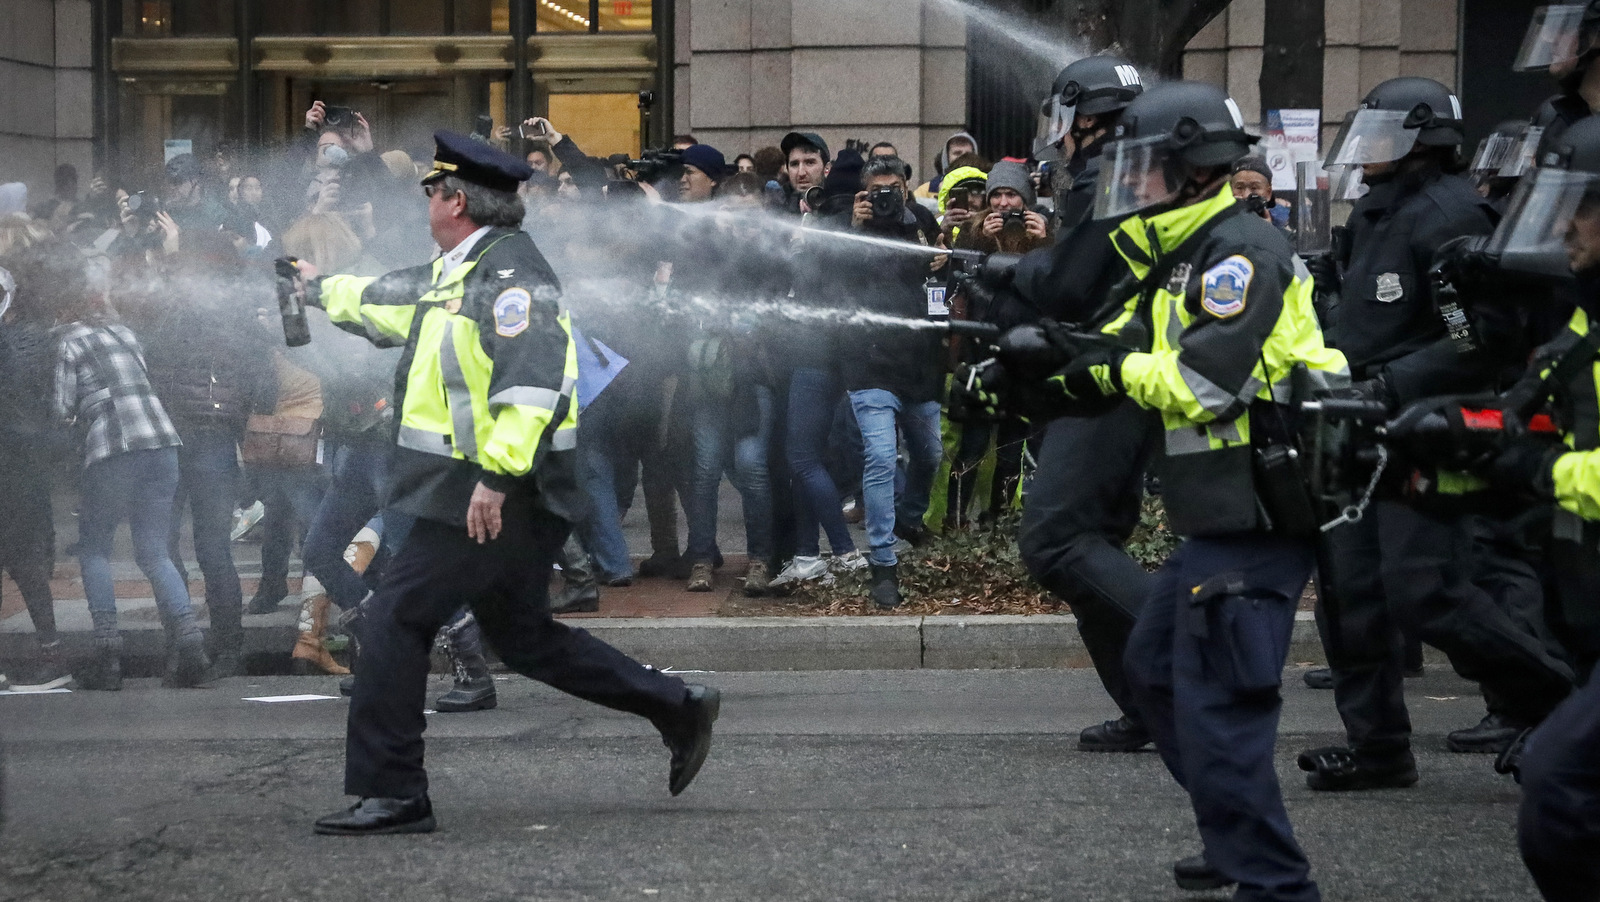 Police fire pepper spray on protestors during a demonstration after the inauguration of President Donald Trump, Friday, Jan. 20, 2017, in Washington. (AP/John Minchillo)